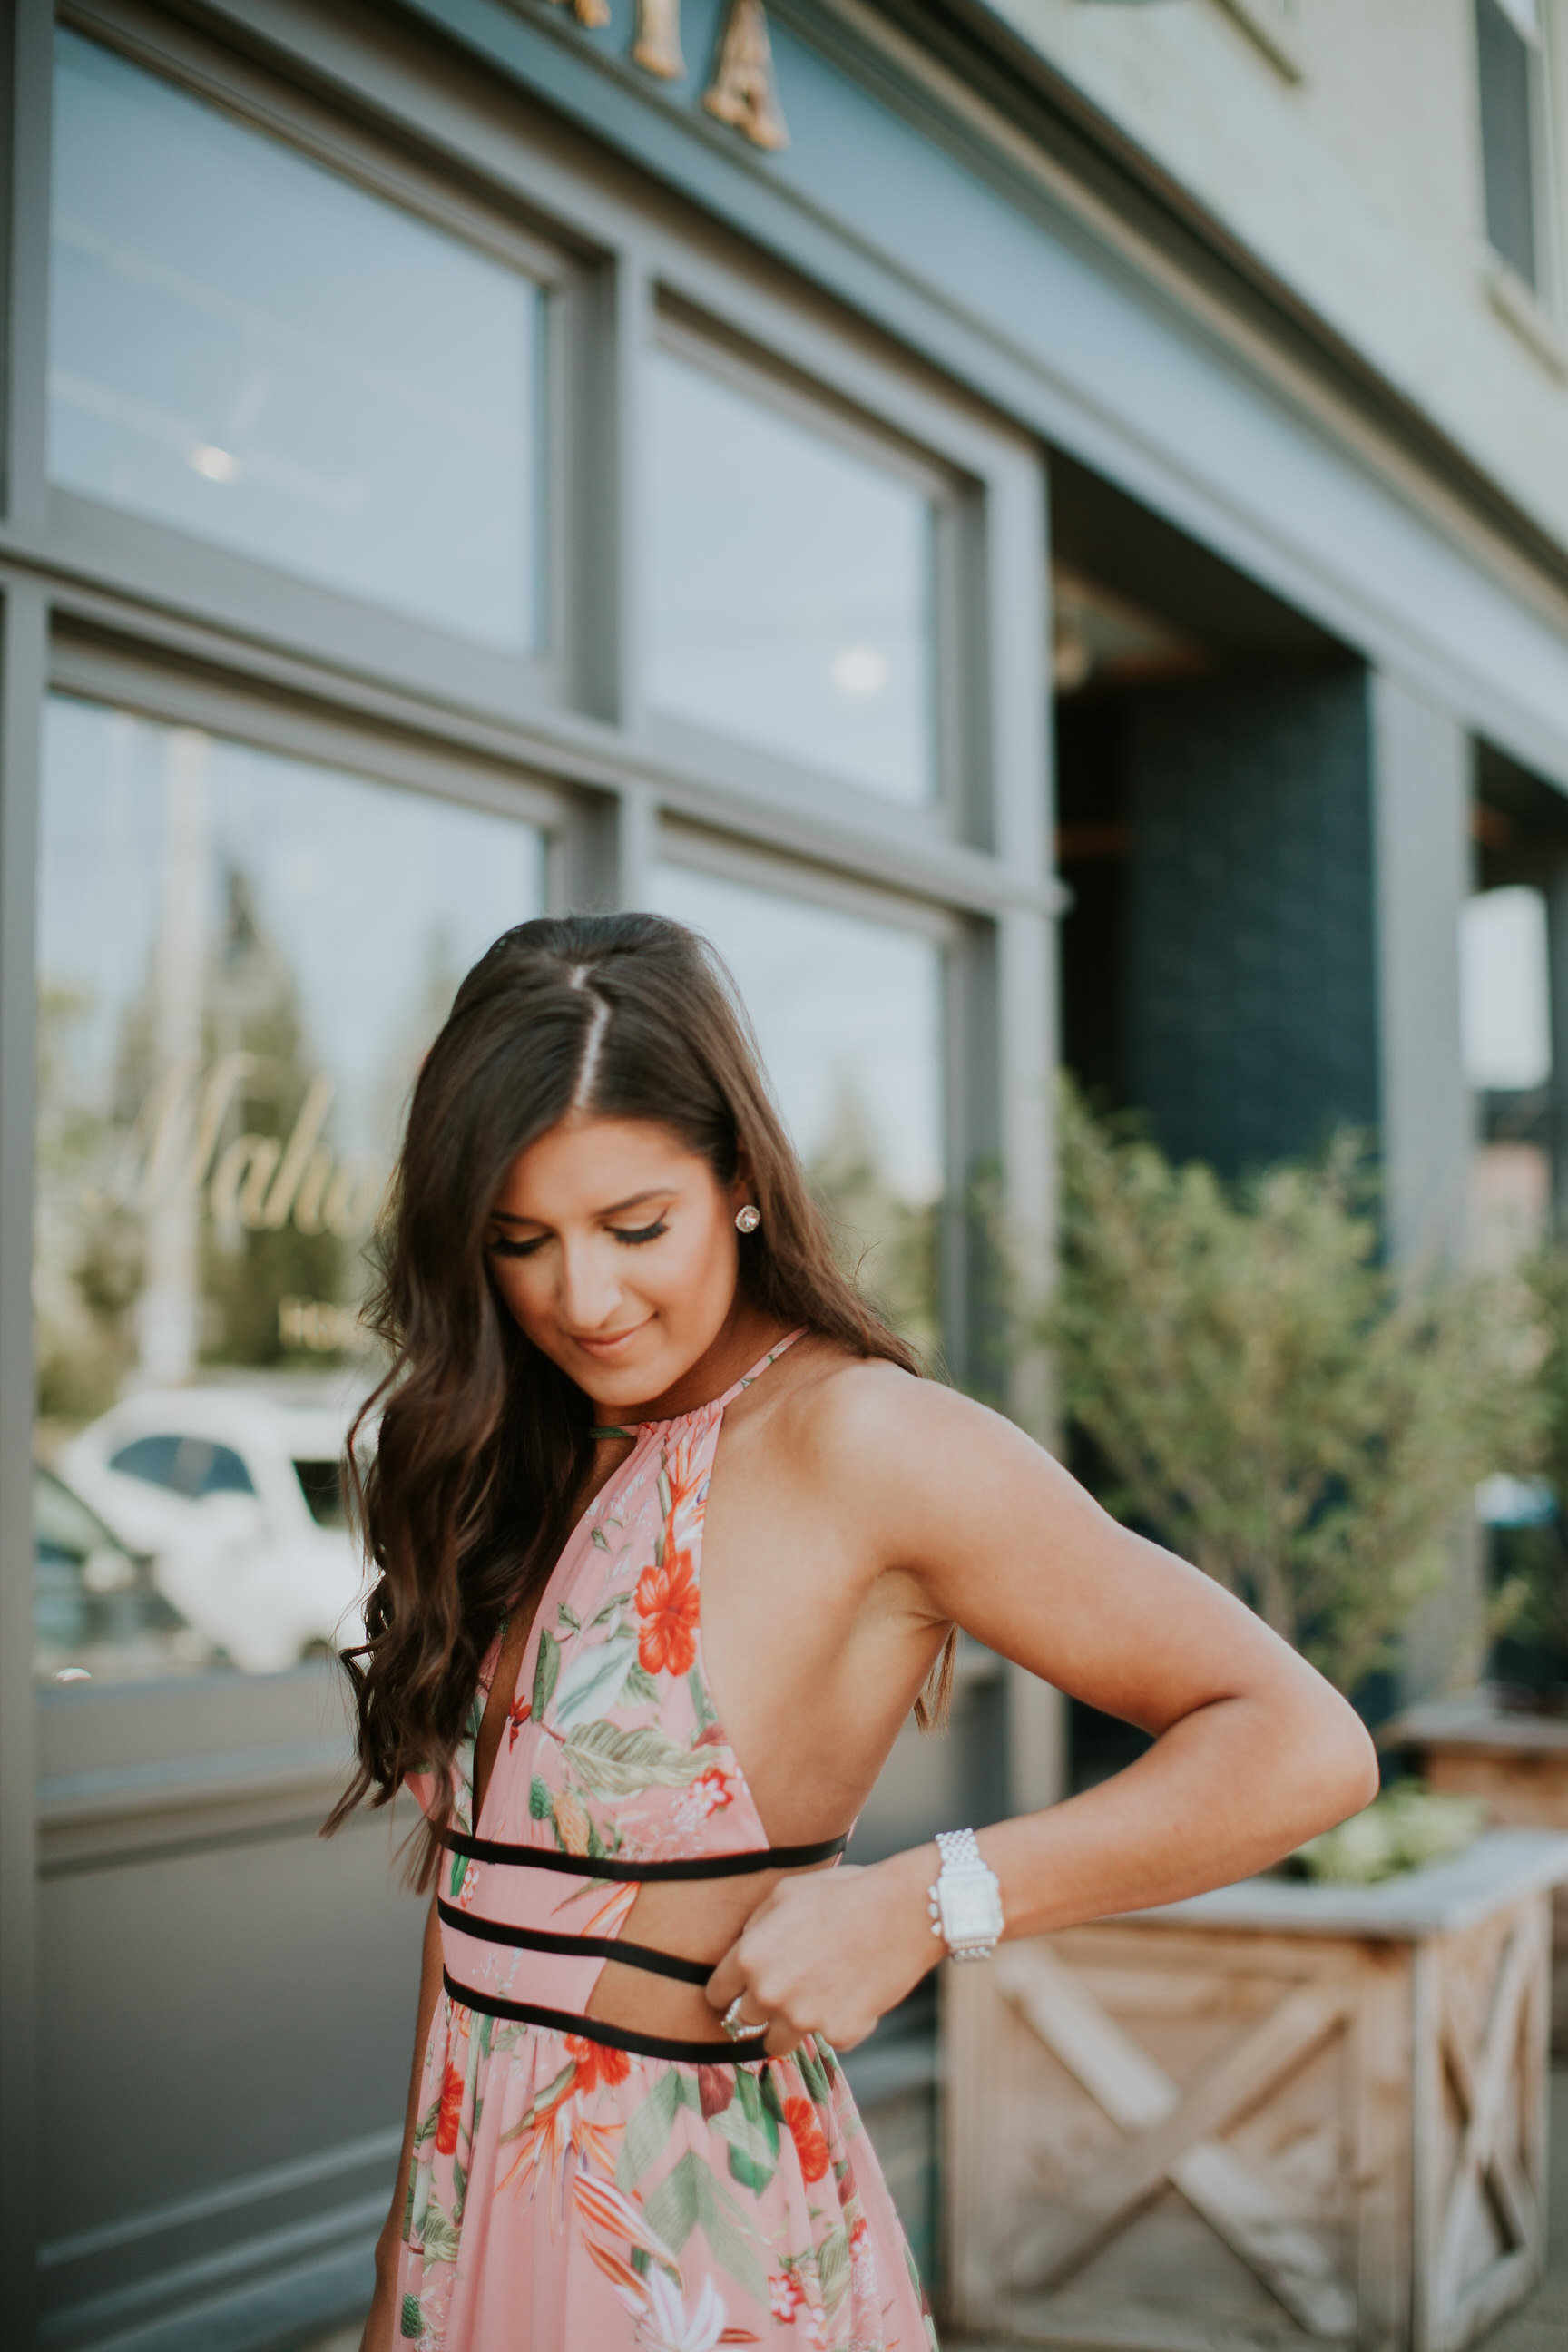 floral maxi dress, express maxi dresses, express sundresses, floral dresses, nude sandals, spring fashion, spring style, spring outfit // grace wainwright a southern drawl